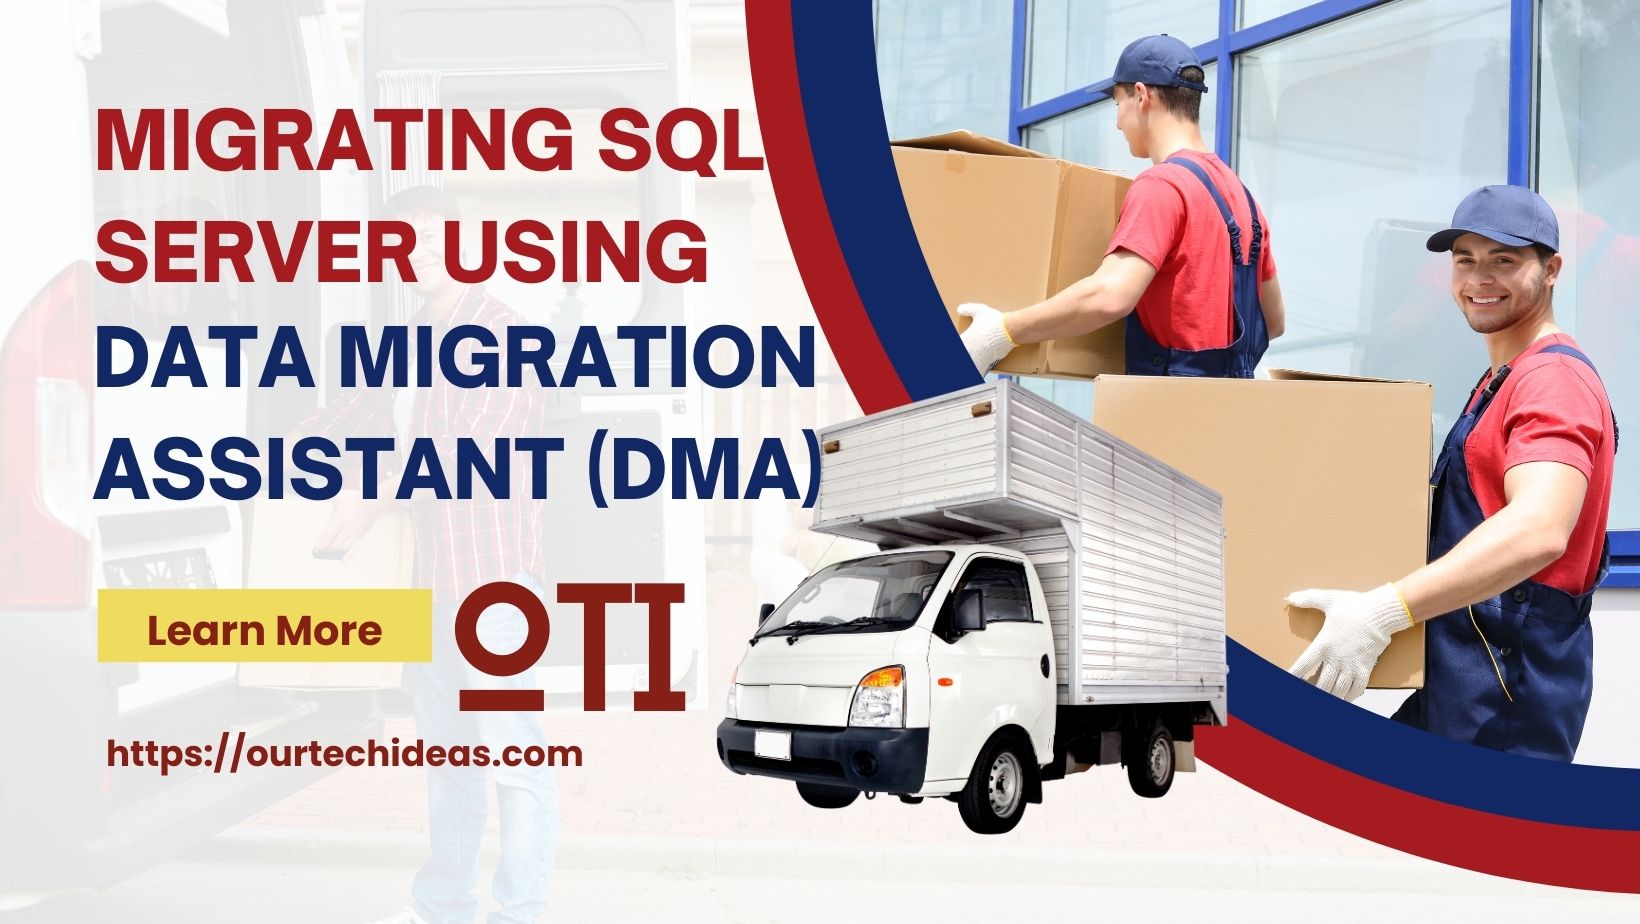 Migrating SQL Server Using Data Migration Assistant (DMA): A Step-by-Step Guide